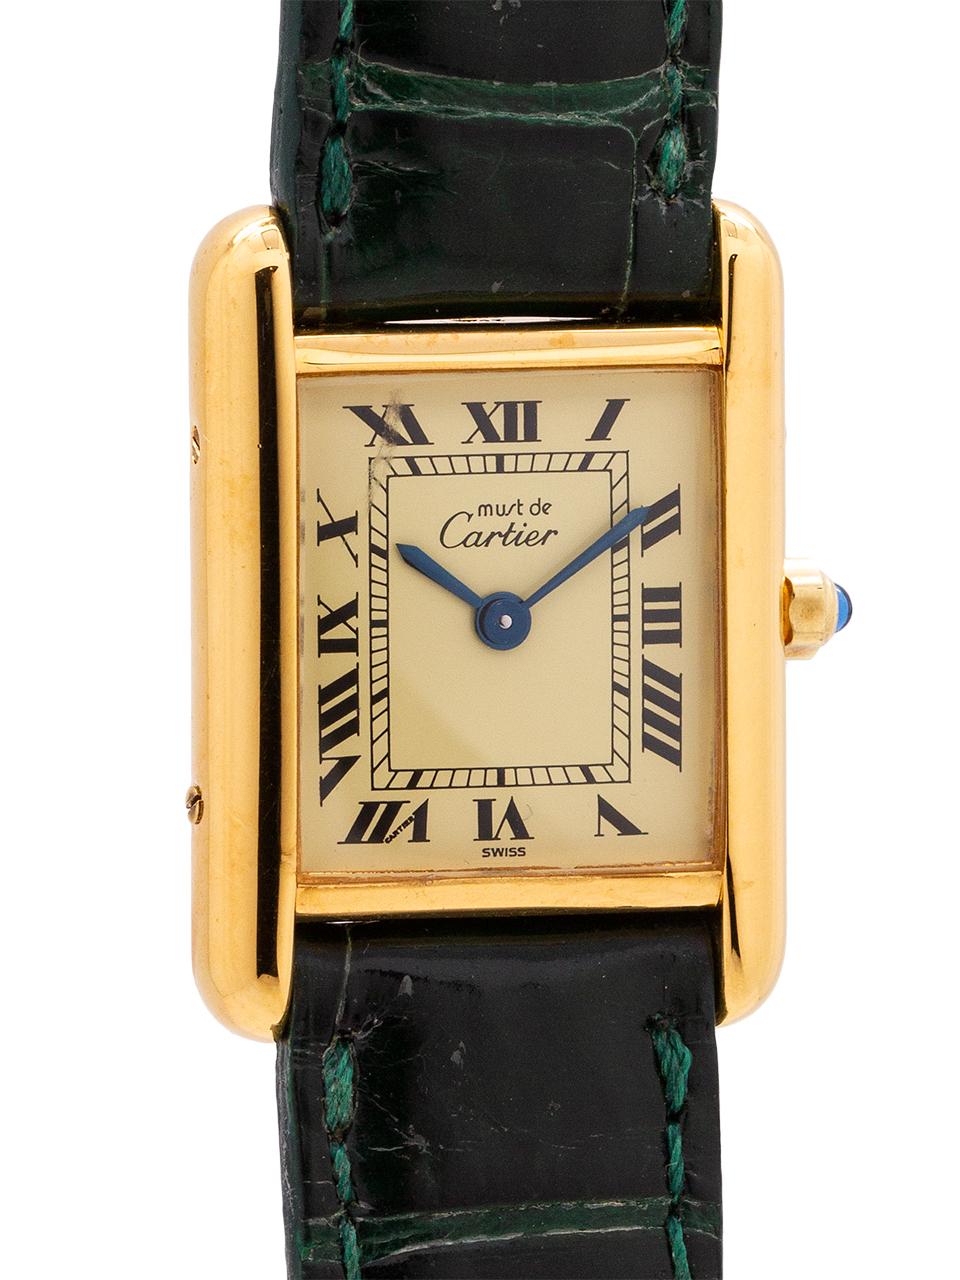 
Cartier Lady’s Tank Louis circa 1990s. Featuring 20 x 28mm vermeil (20 microns gold over silver) case secured by 4 side and 4 case back screws. Featuring classic cream color dial signed Must de Cartier with printed black Roman numerals and blued